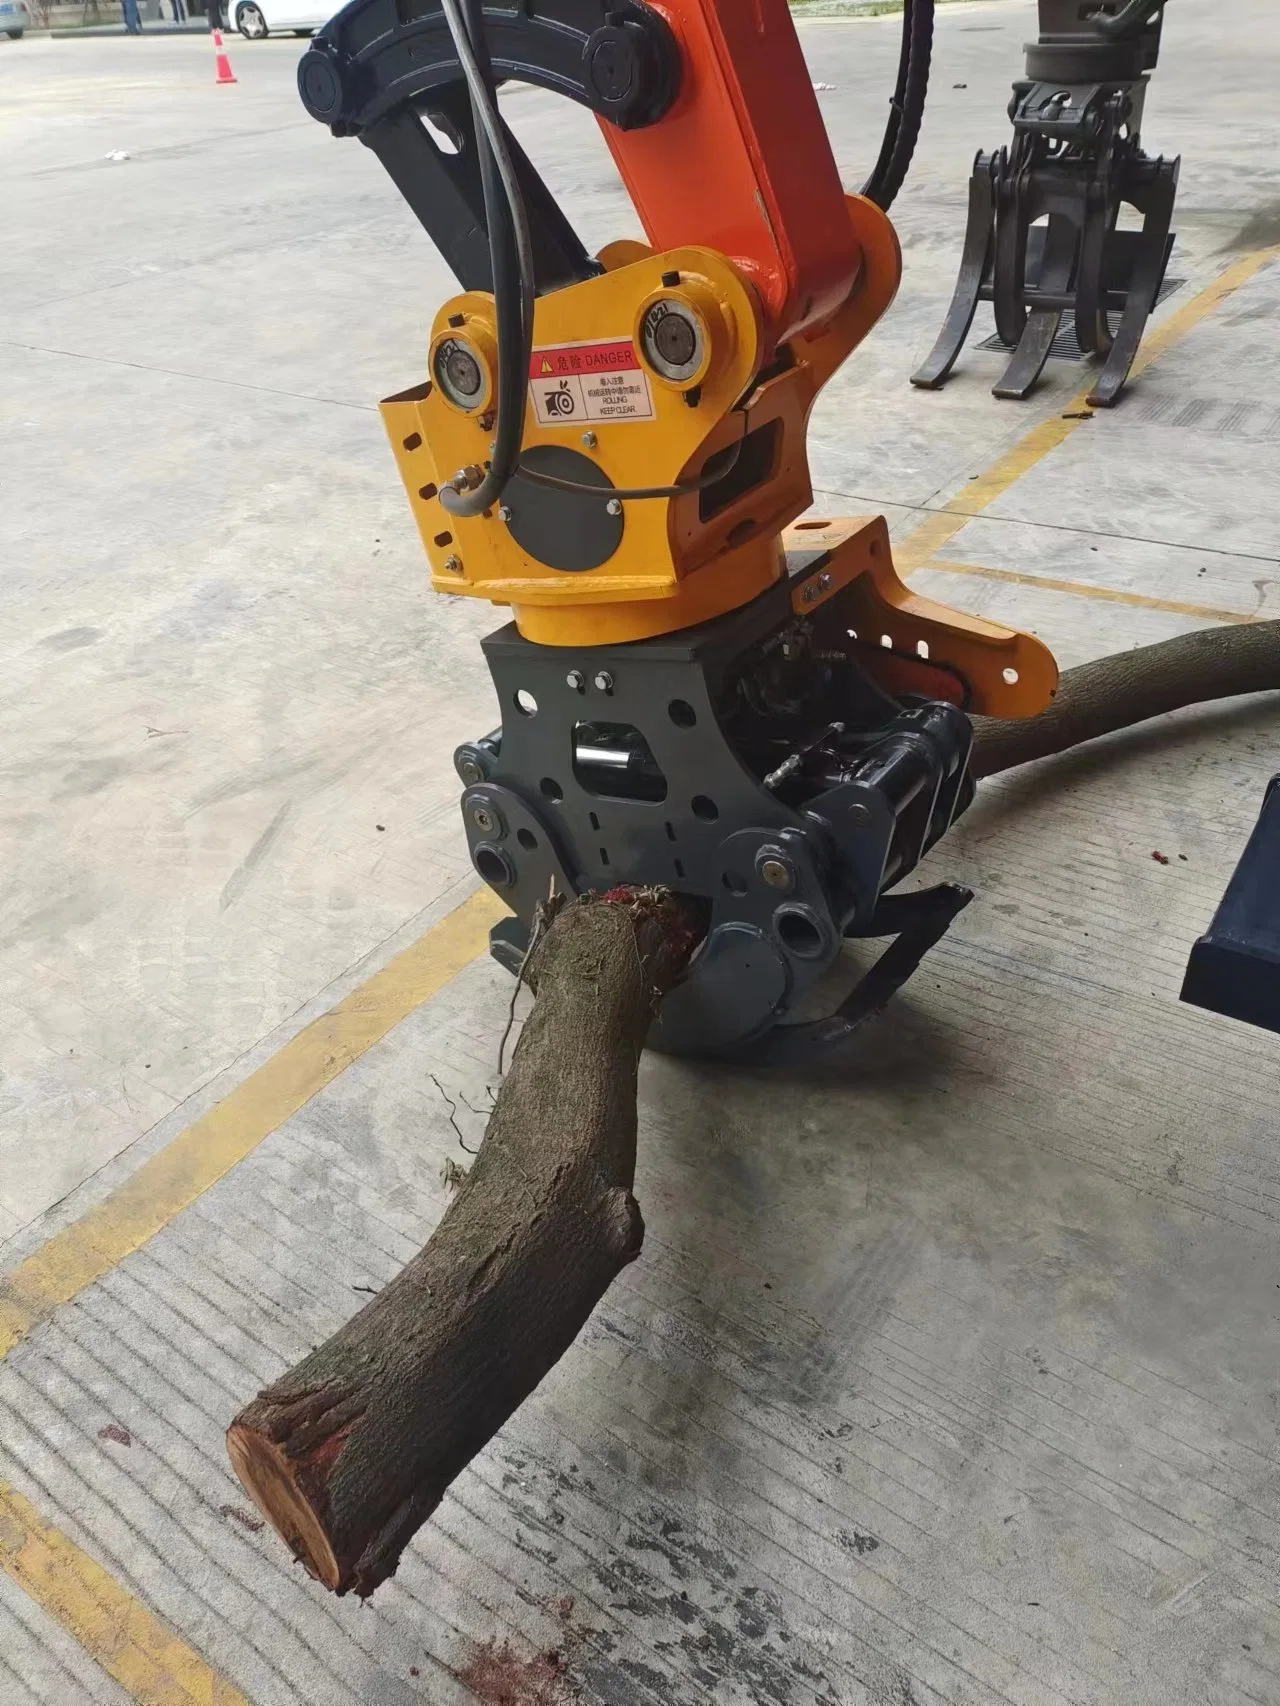 Speed up Handling of Wood Use Jg Hydraulic Grapple Saws Fitted to Excavator Machine